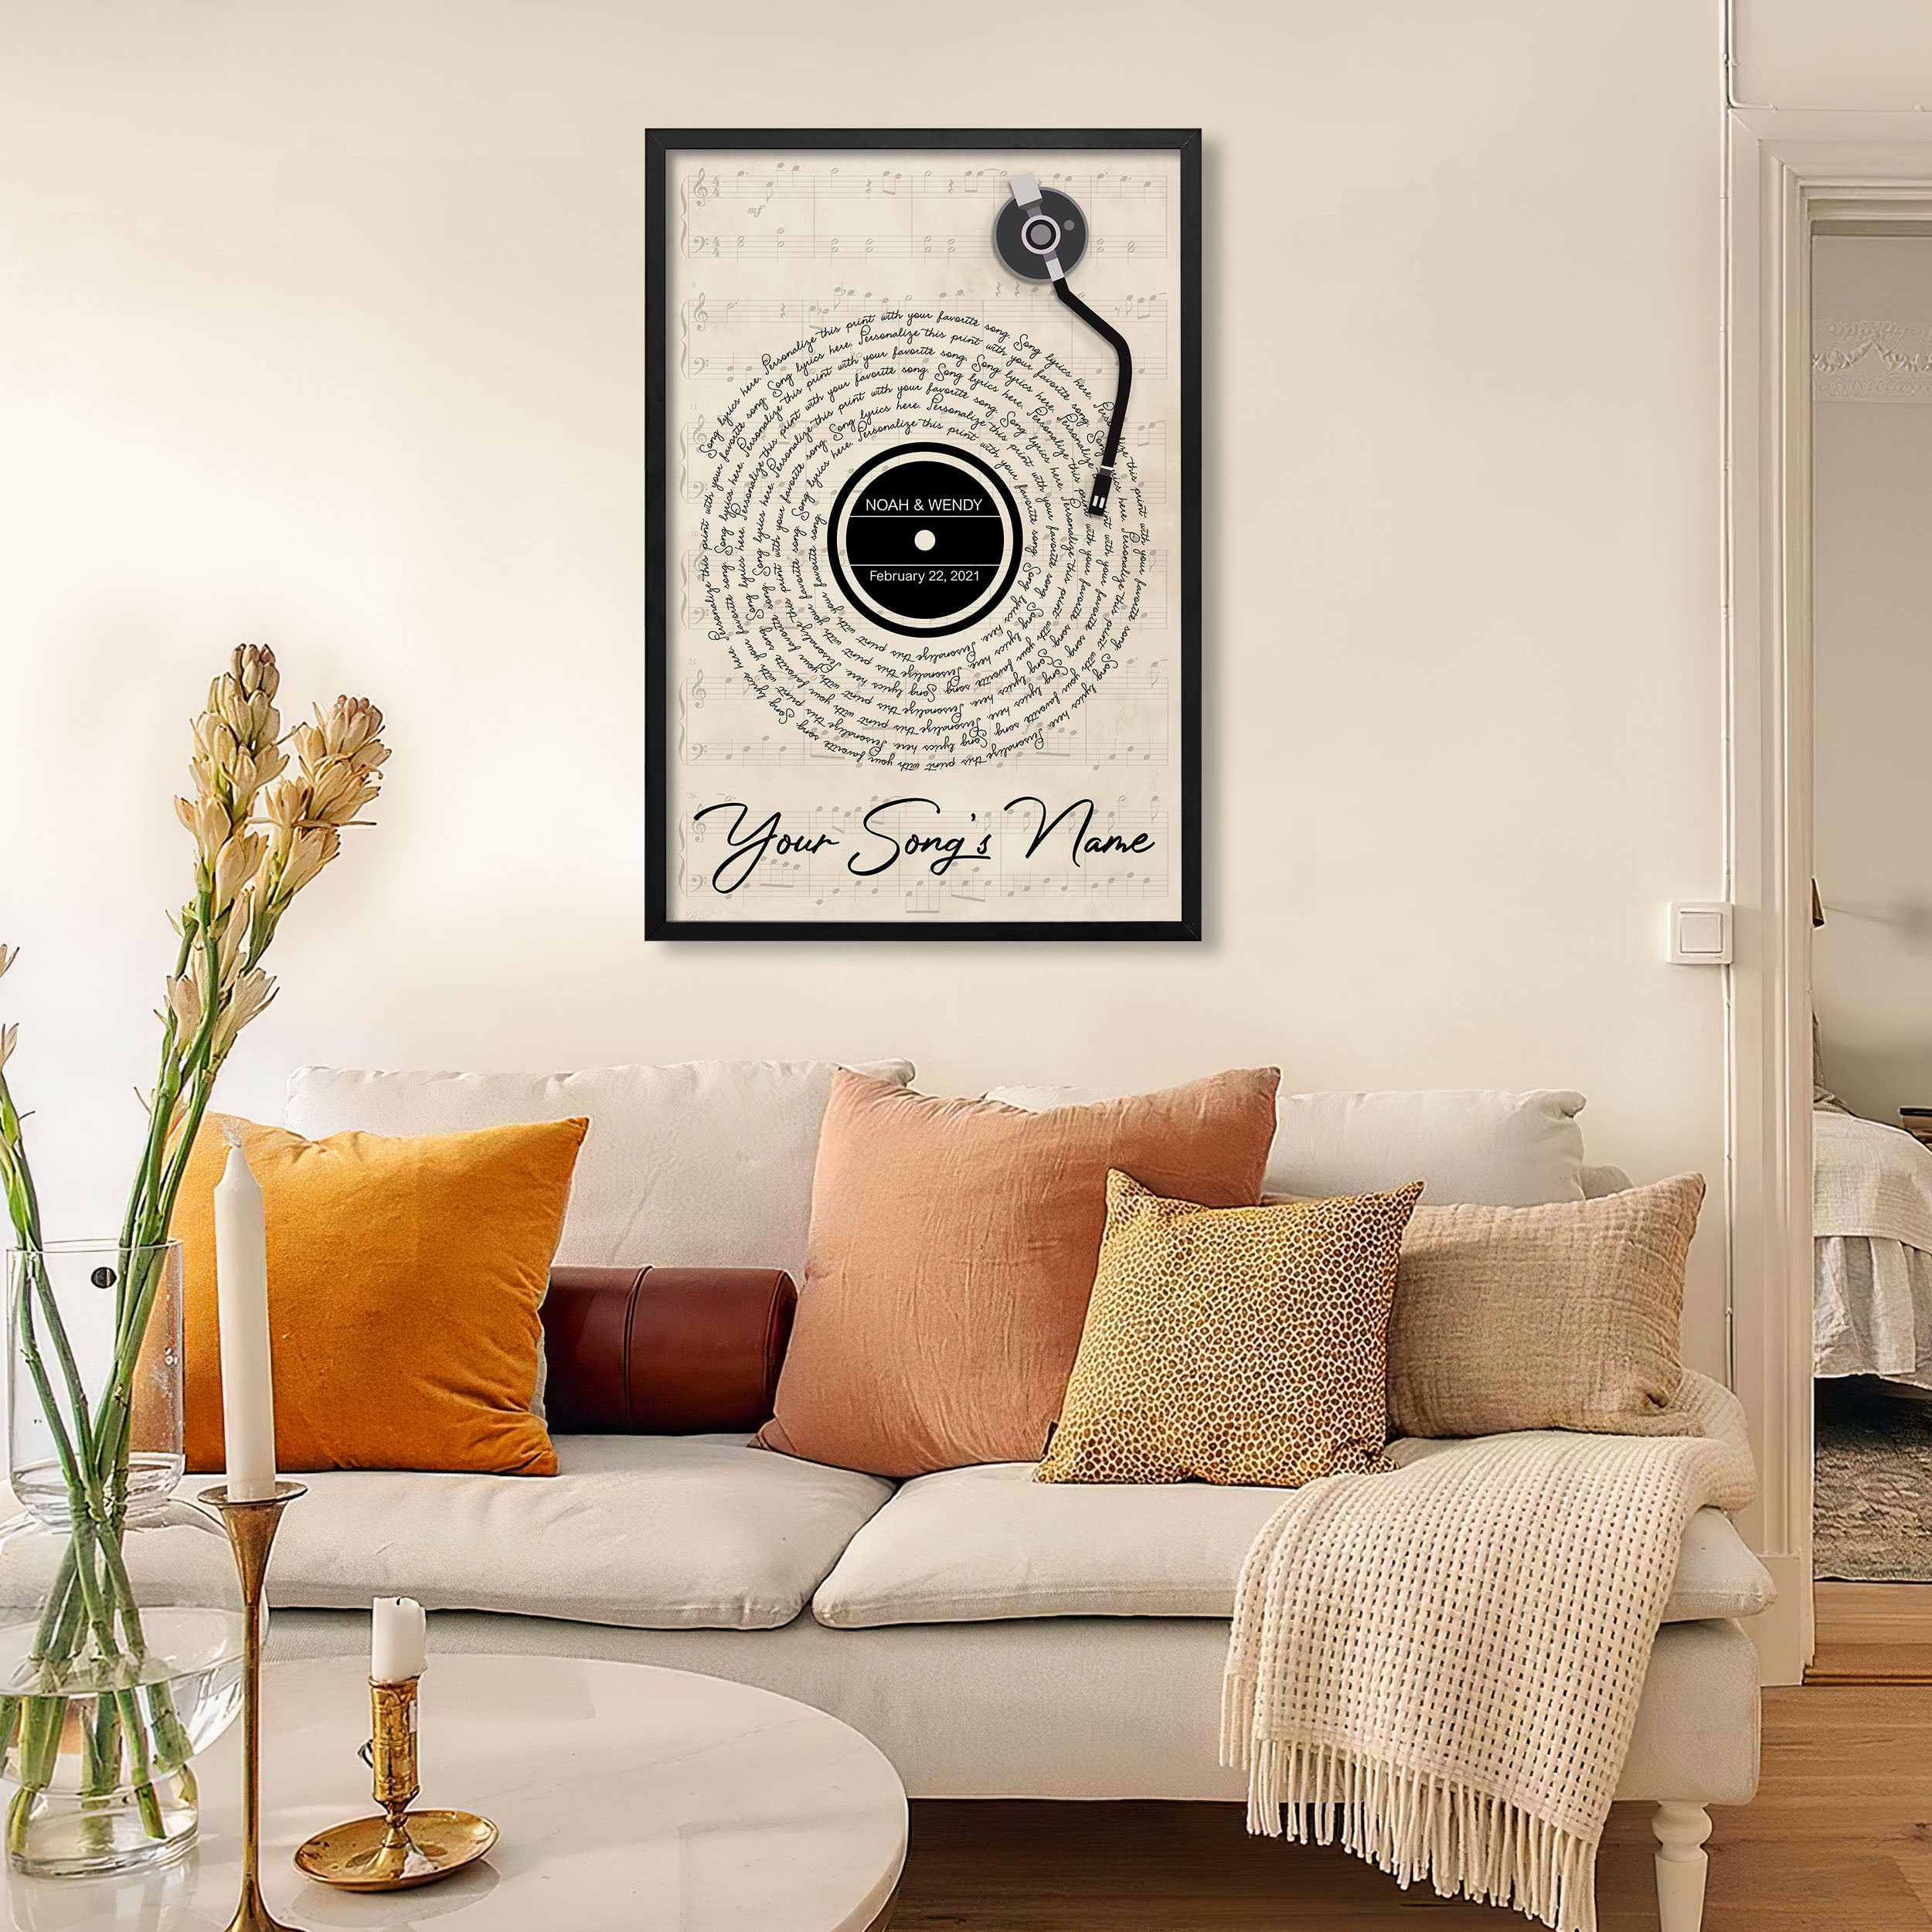 Custom Song Lyrics Poster Canvas Wall Art Perfect Song Chords Couple One Year Anniversary Vinyl Record Gifts For Him